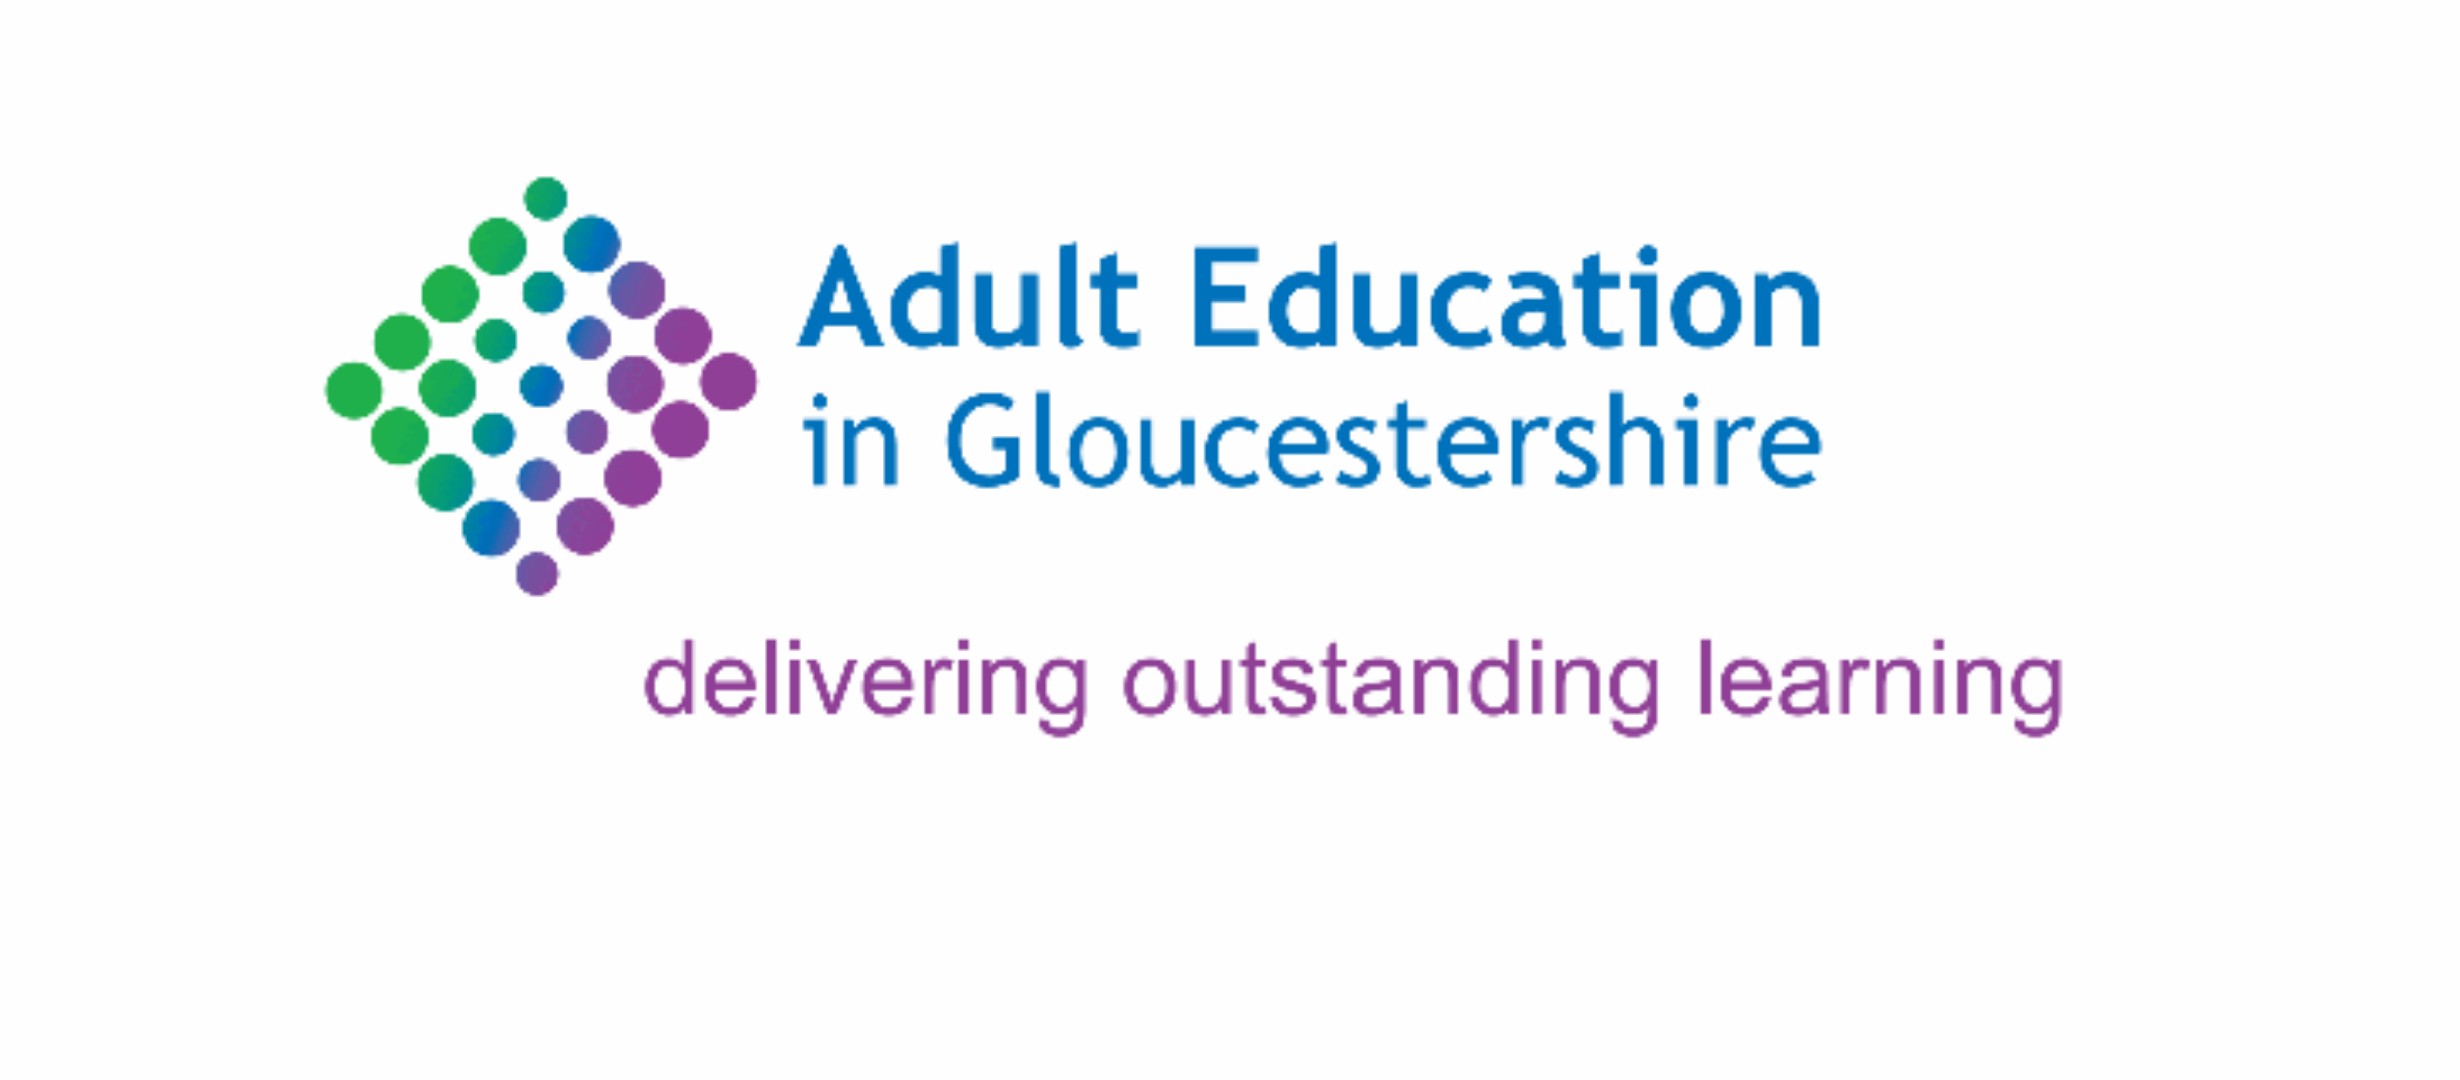 Adult Education in Gloucestershire delivering outstanding learning